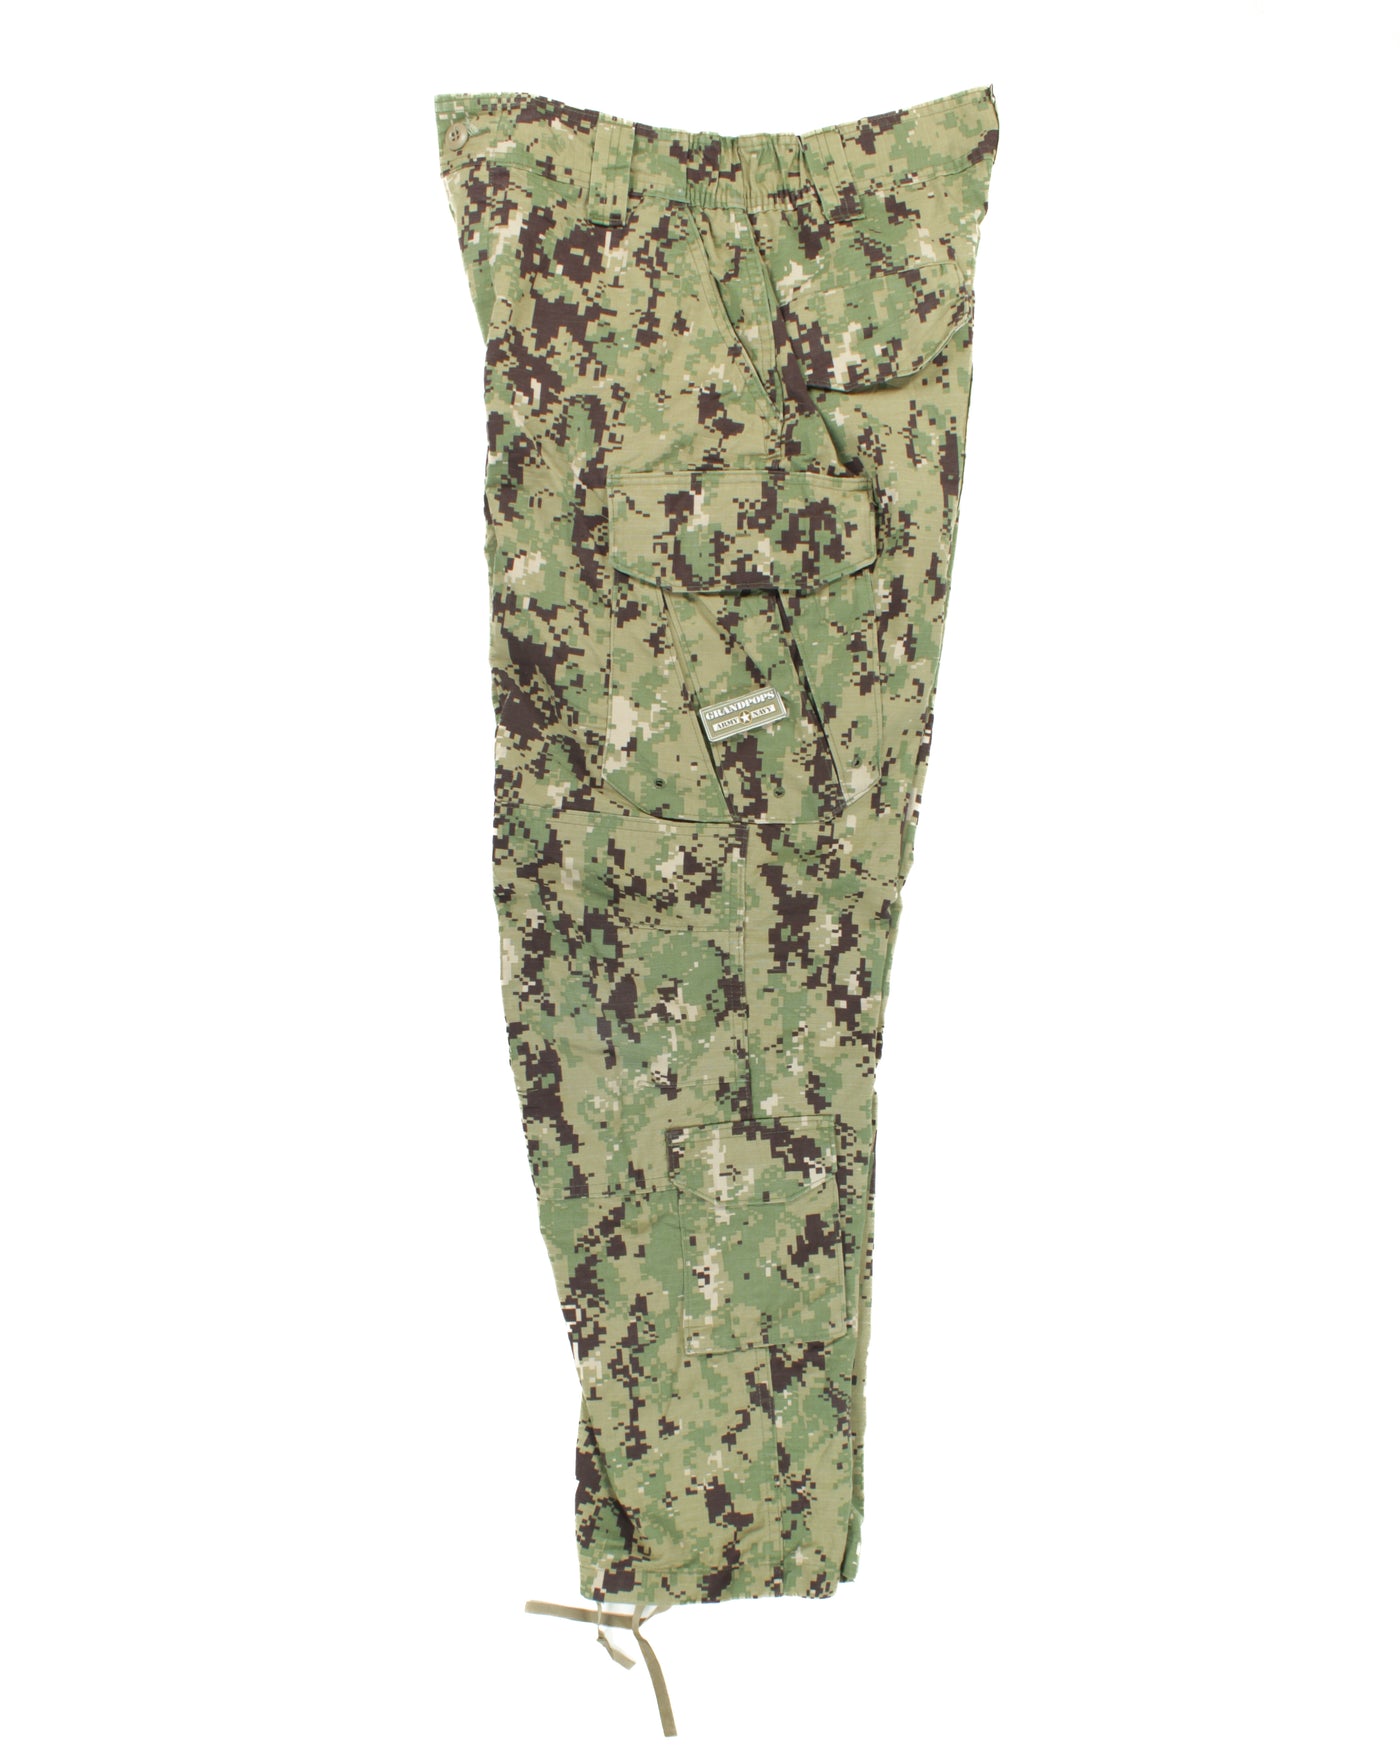 AS-IS NAVY NWU Type 1 Trousers